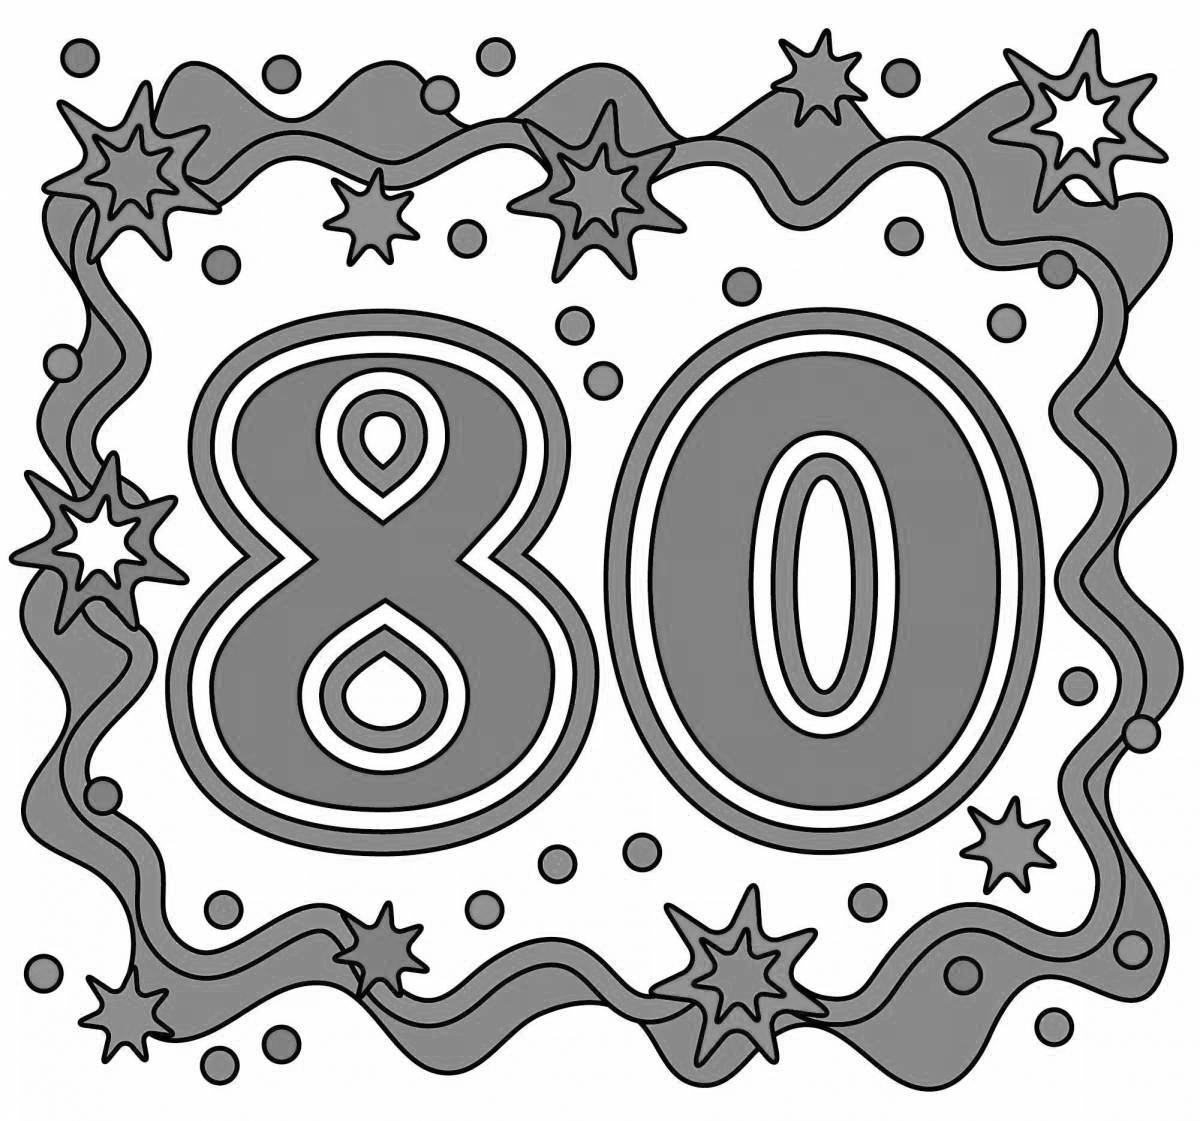 Charming coloring page number 80